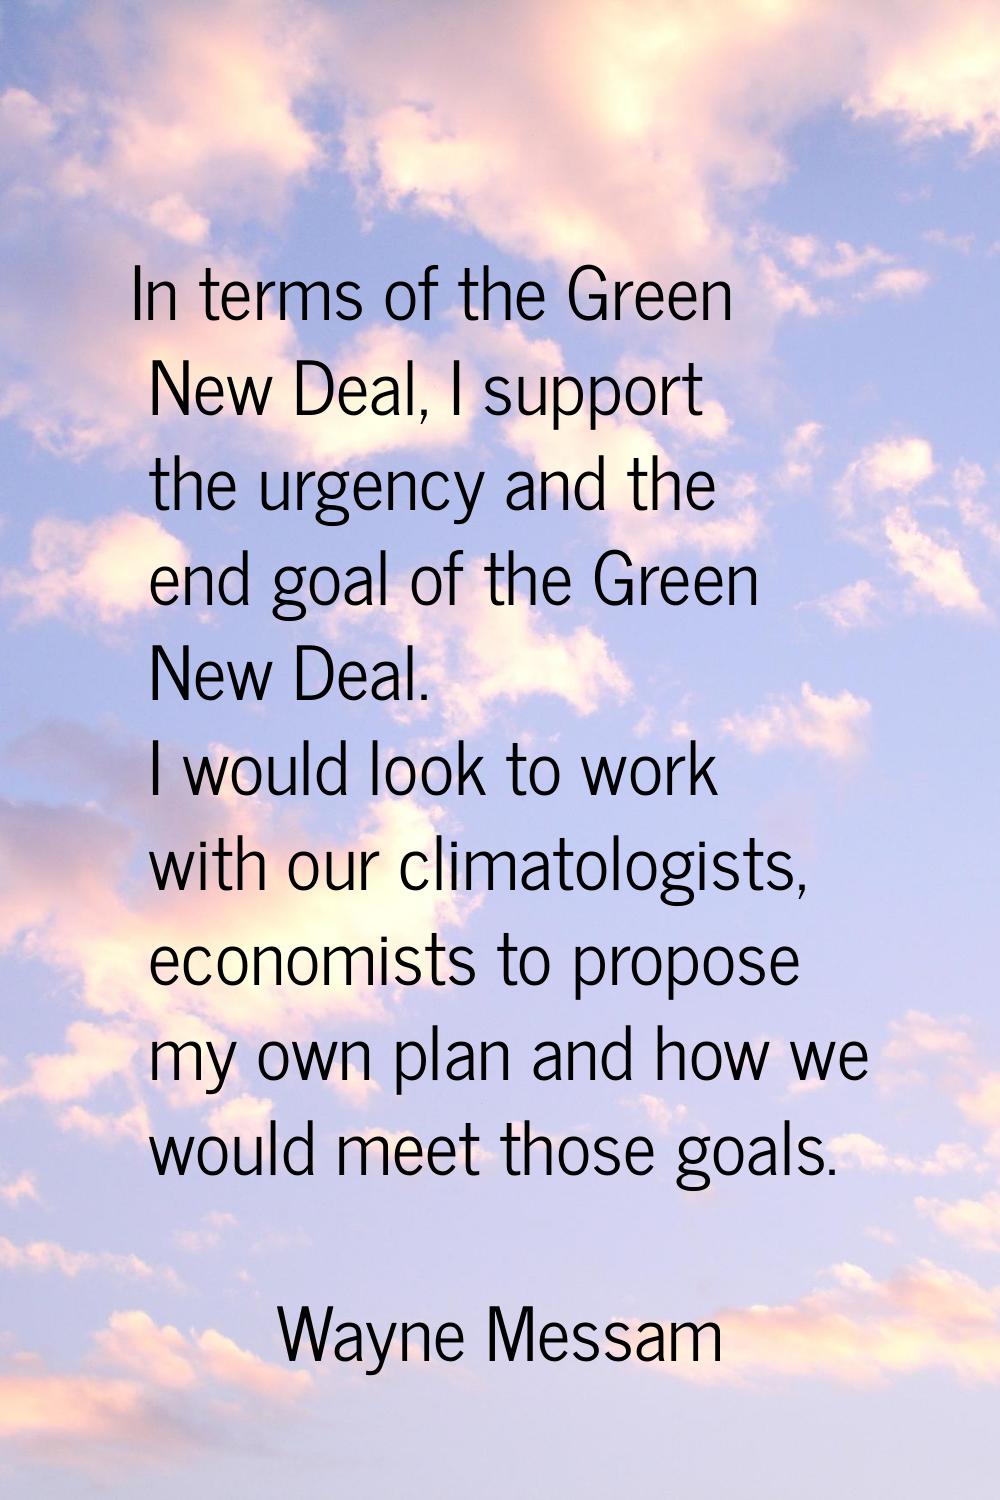 In terms of the Green New Deal, I support the urgency and the end goal of the Green New Deal. I wou